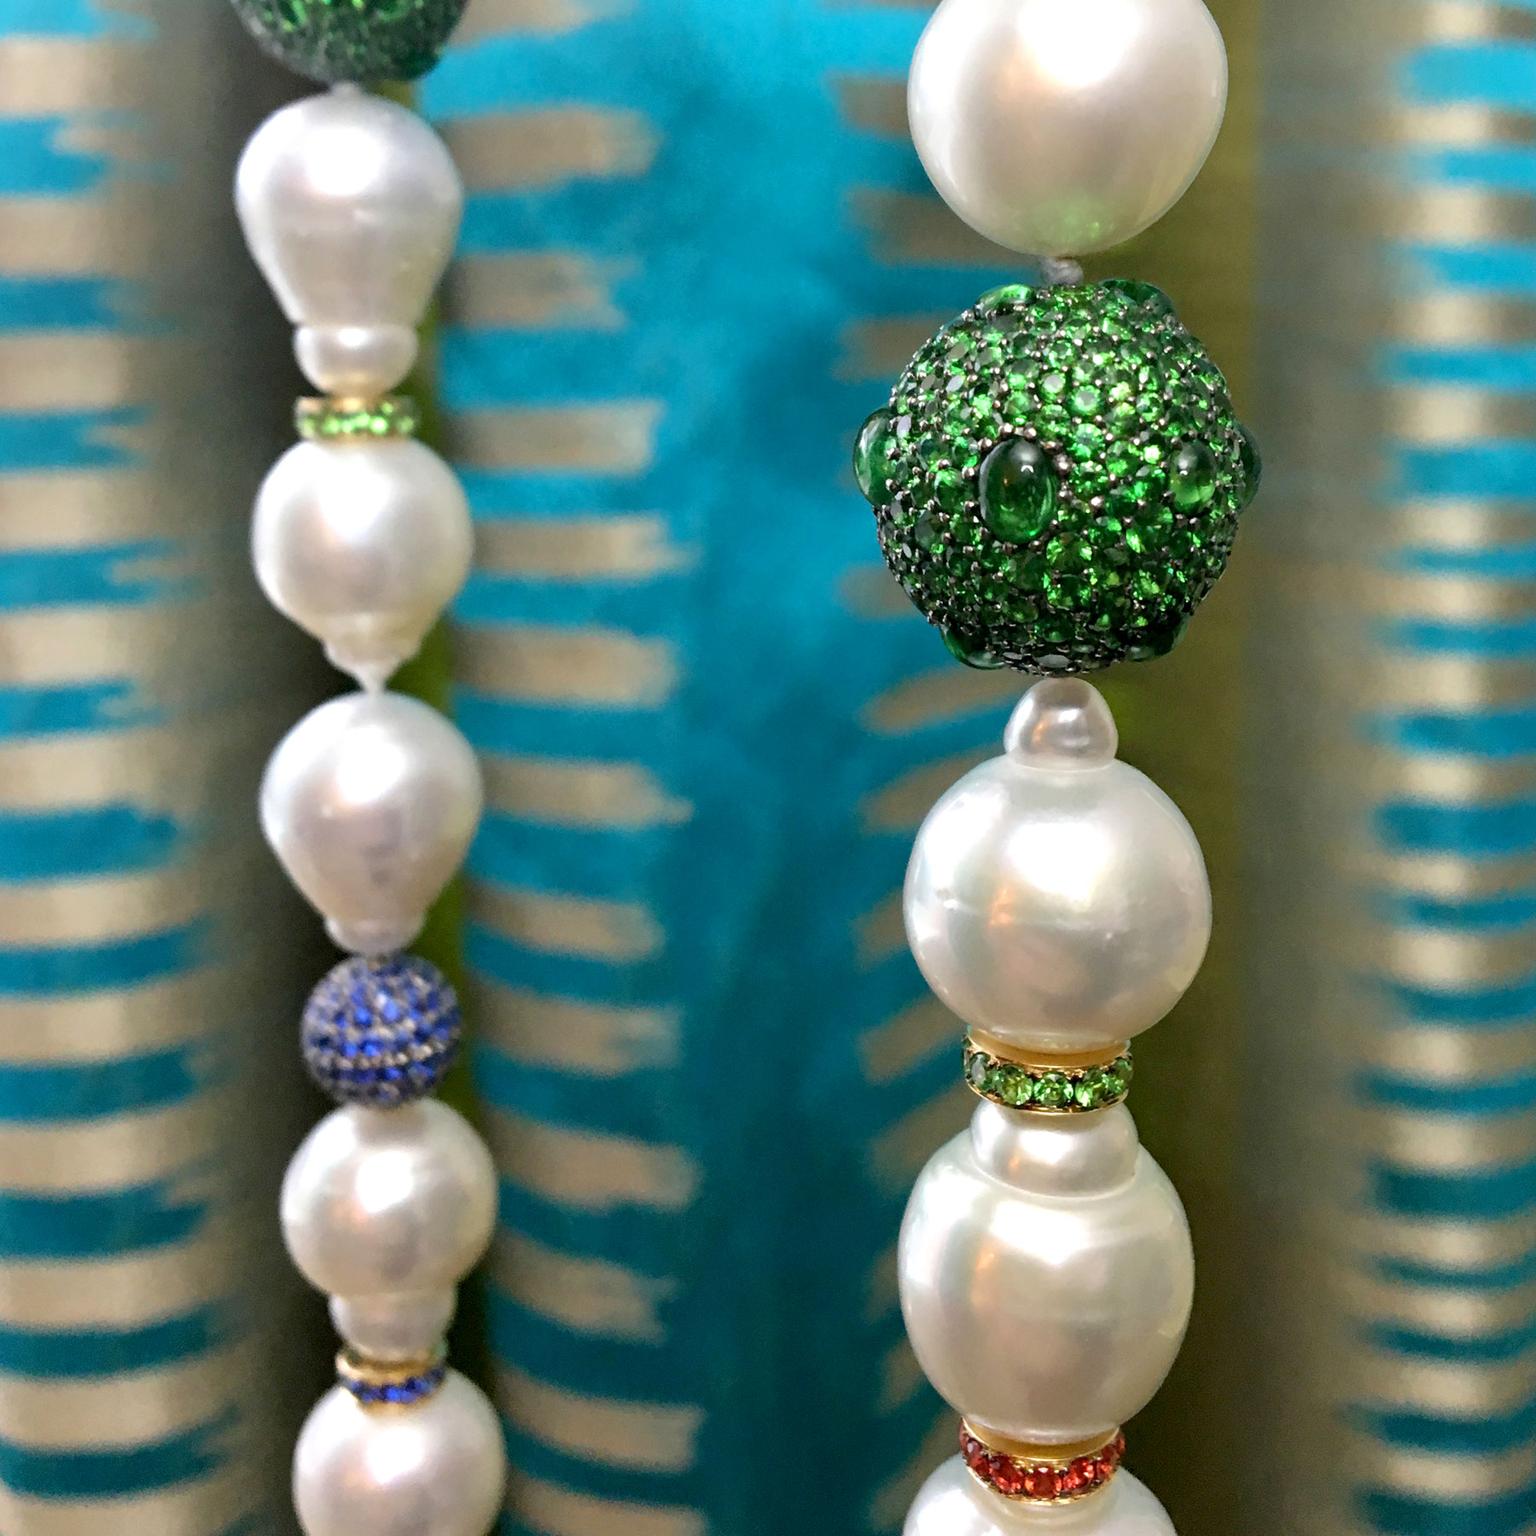 Margot McKinney baroque pearl necklace with coloured gemstone planets 